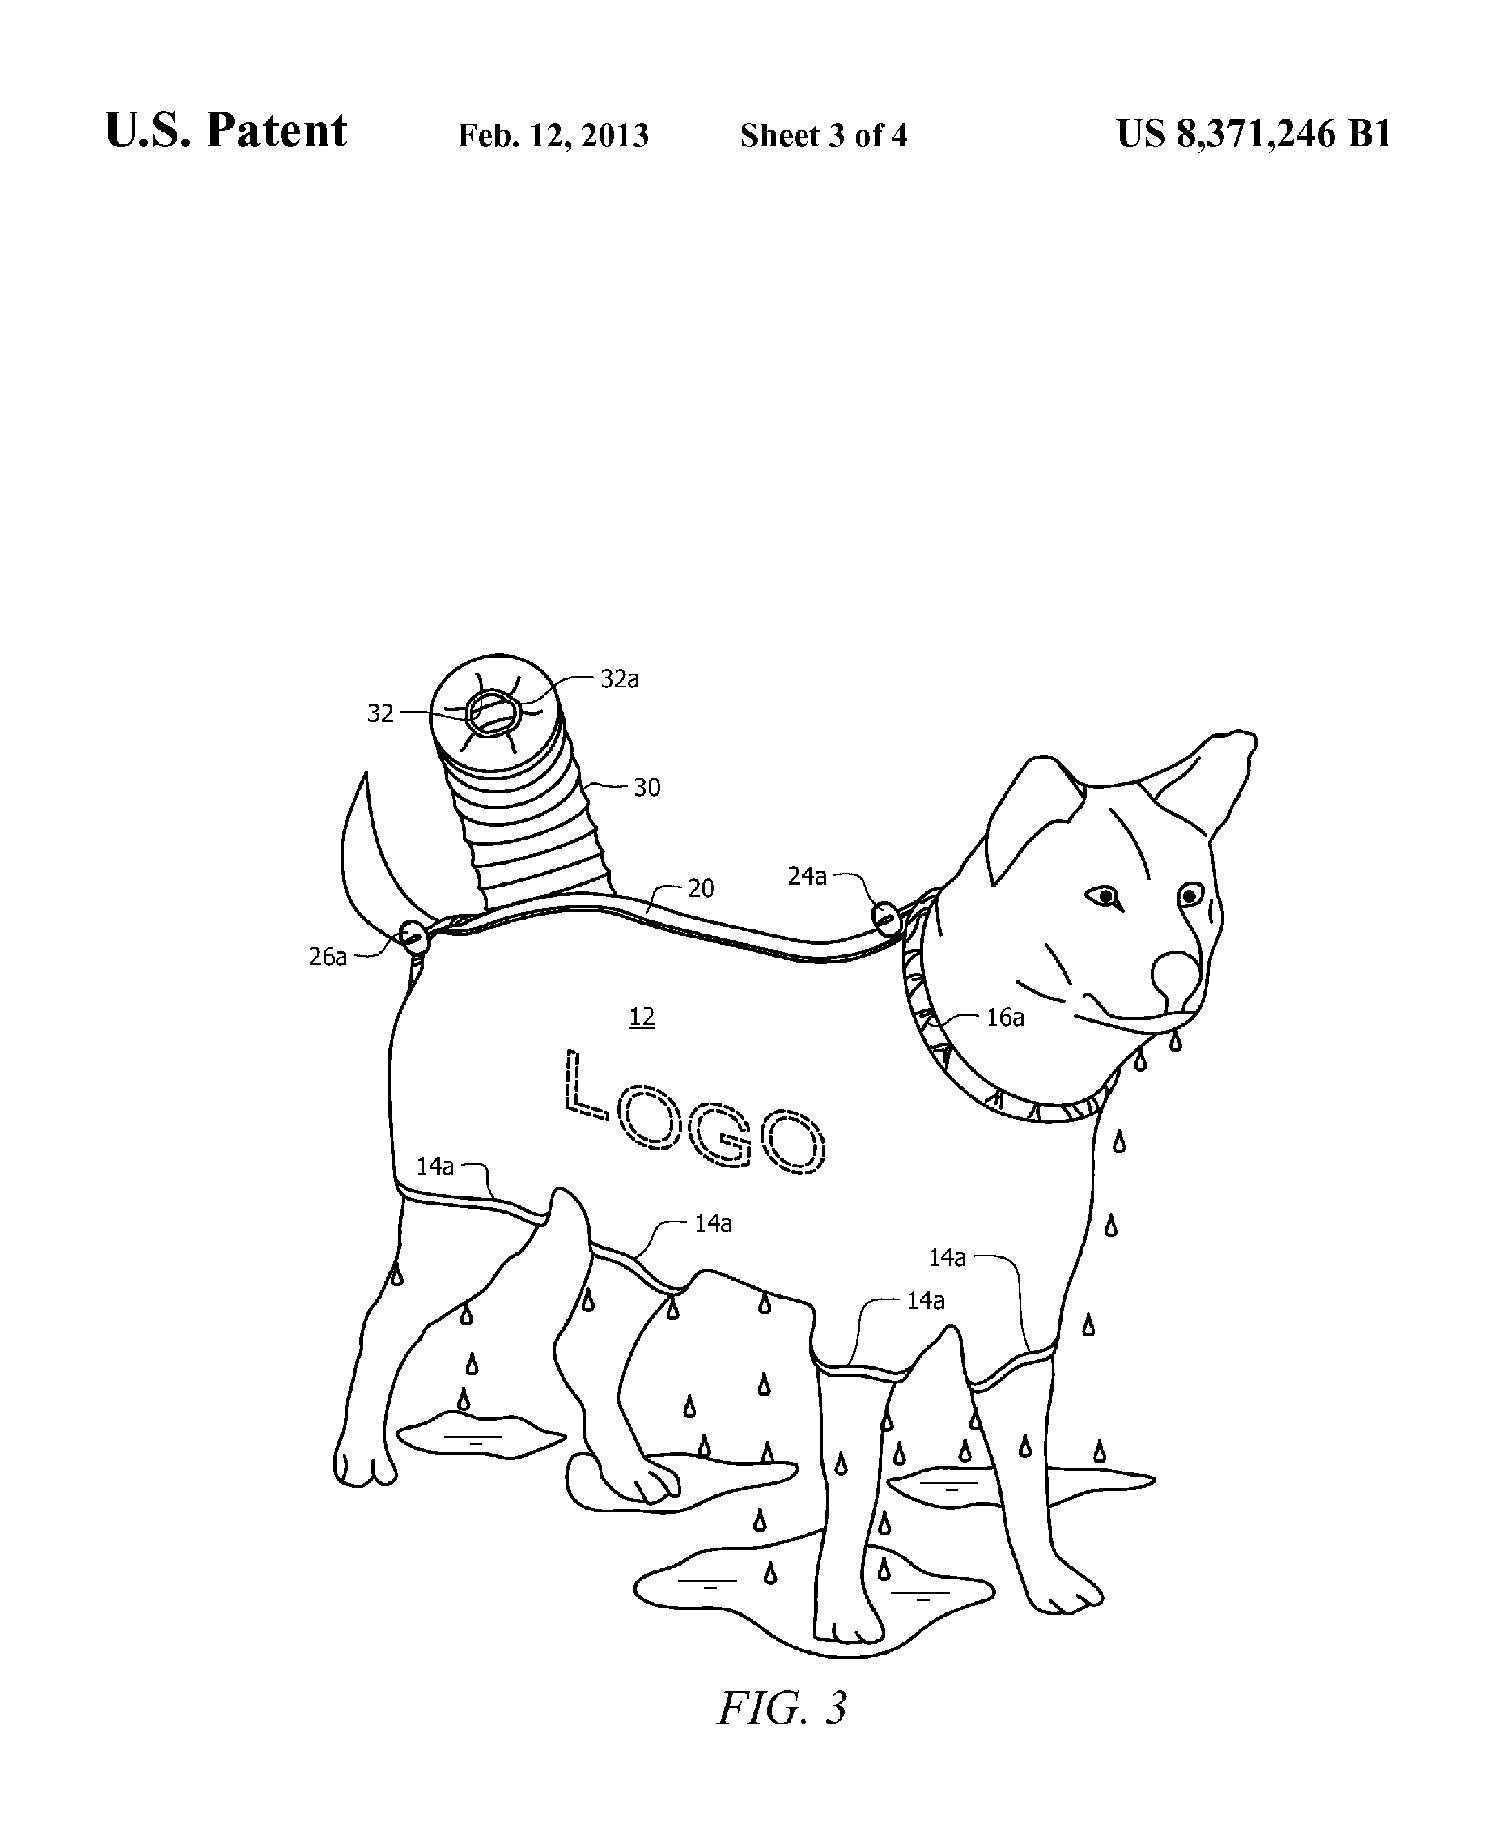 This patent drawing shows a dripping-wet dog wearing the Puff-N-Fluff.